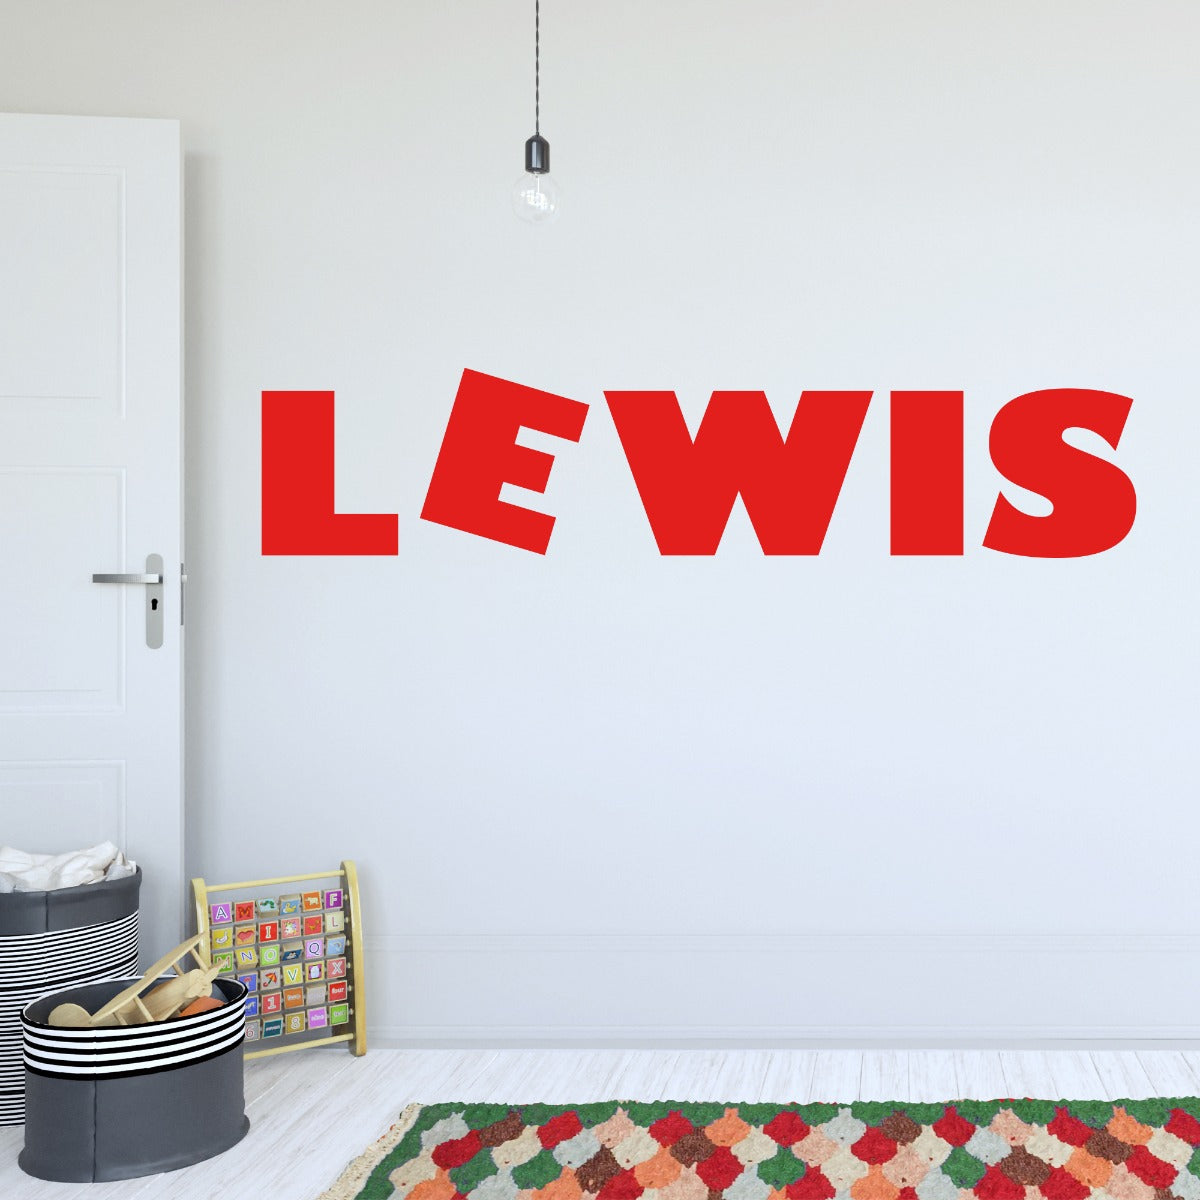 Gaming Wall Sticker - Personalised Red Block Name